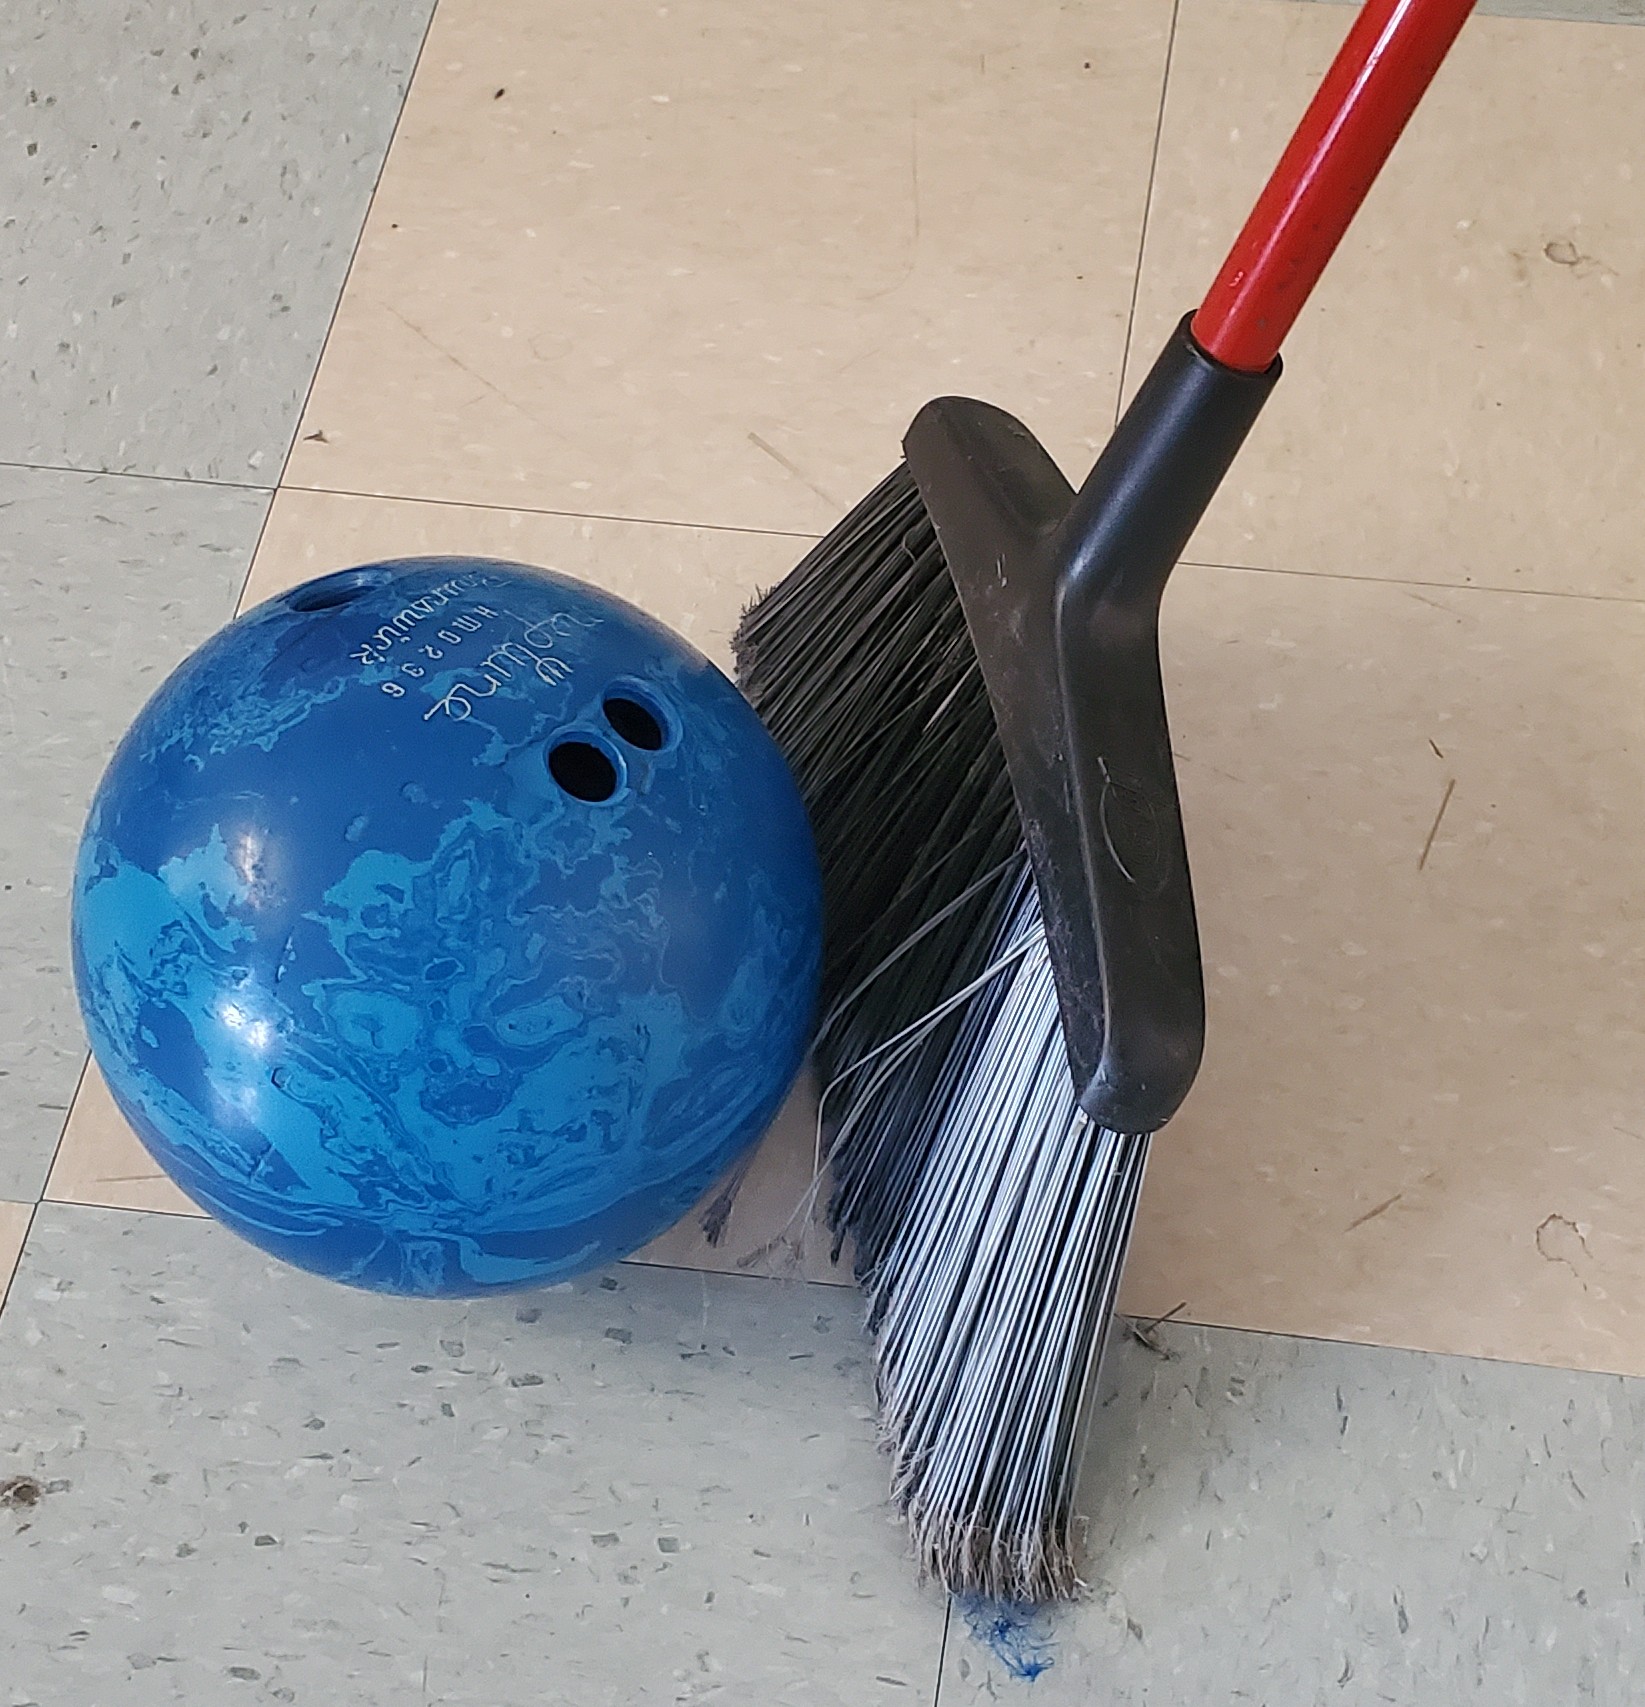 Introducing forces using bowling balls & brooms